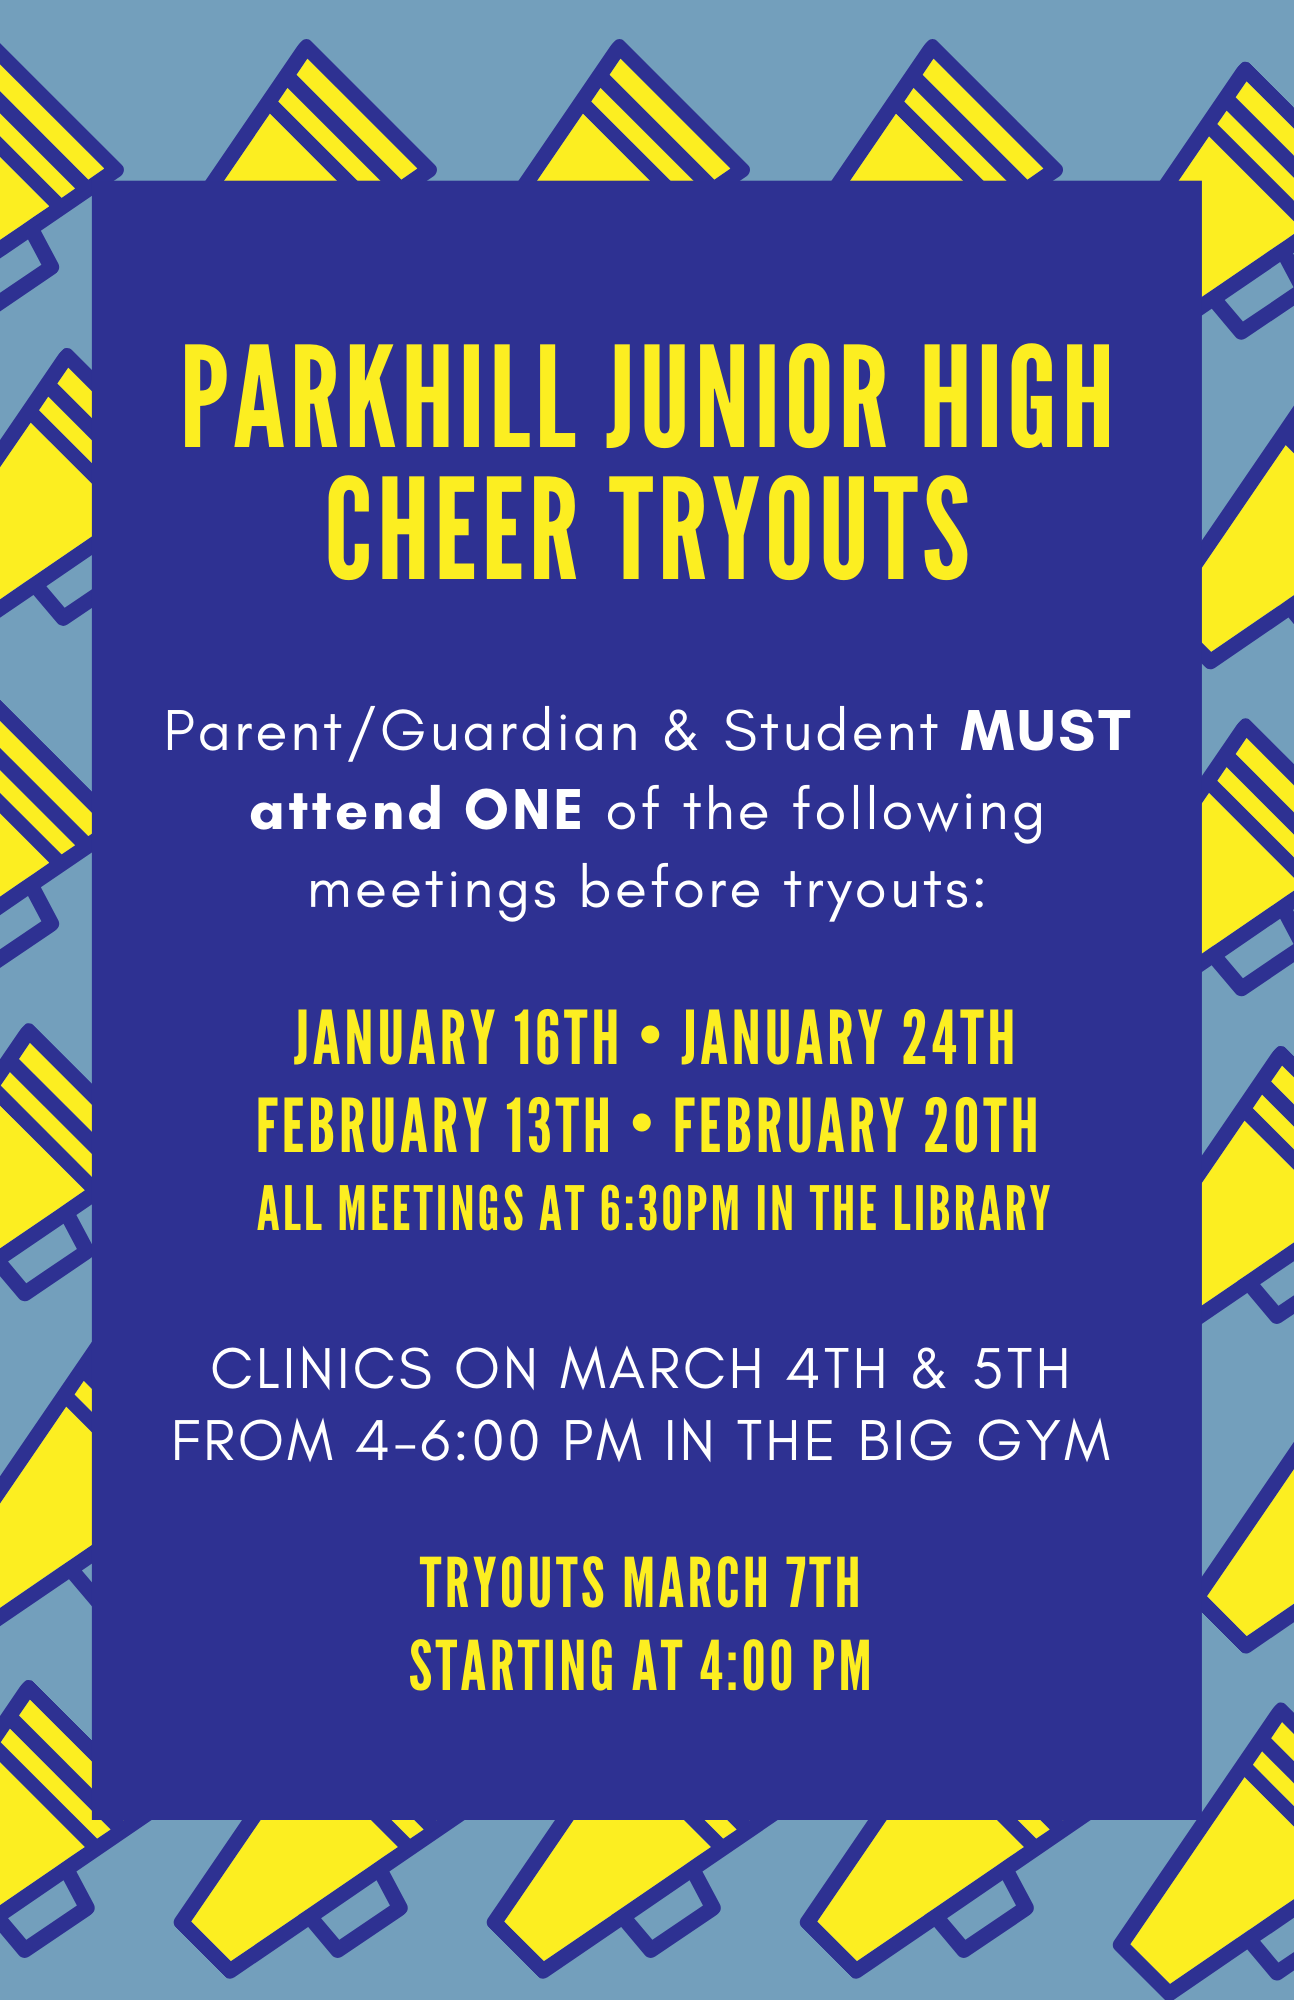 Parent/Guardian & Student MUST attend ONE of the following meetings before tryouts: January 16th, January 24th, February 13th, and February 20th. All meetings at 6:30 PM in the library. Clinics on March 4th and 5th from 4:00-6:00 PM in the Big Gym. Tryouts are March 7th starting at 4:00 PM.